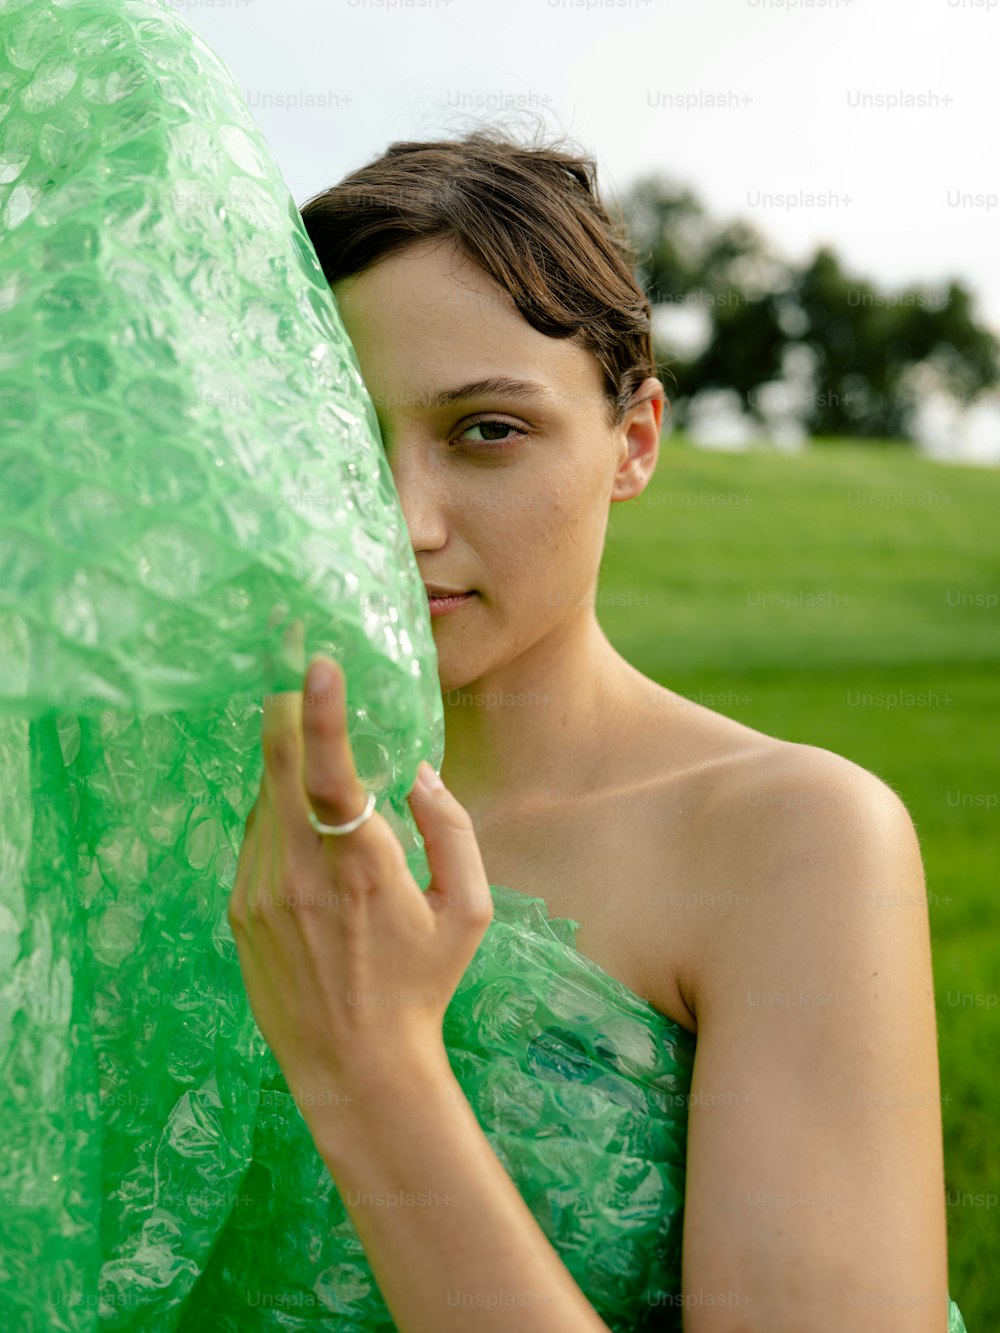 a woman in a green dress holding a large green object